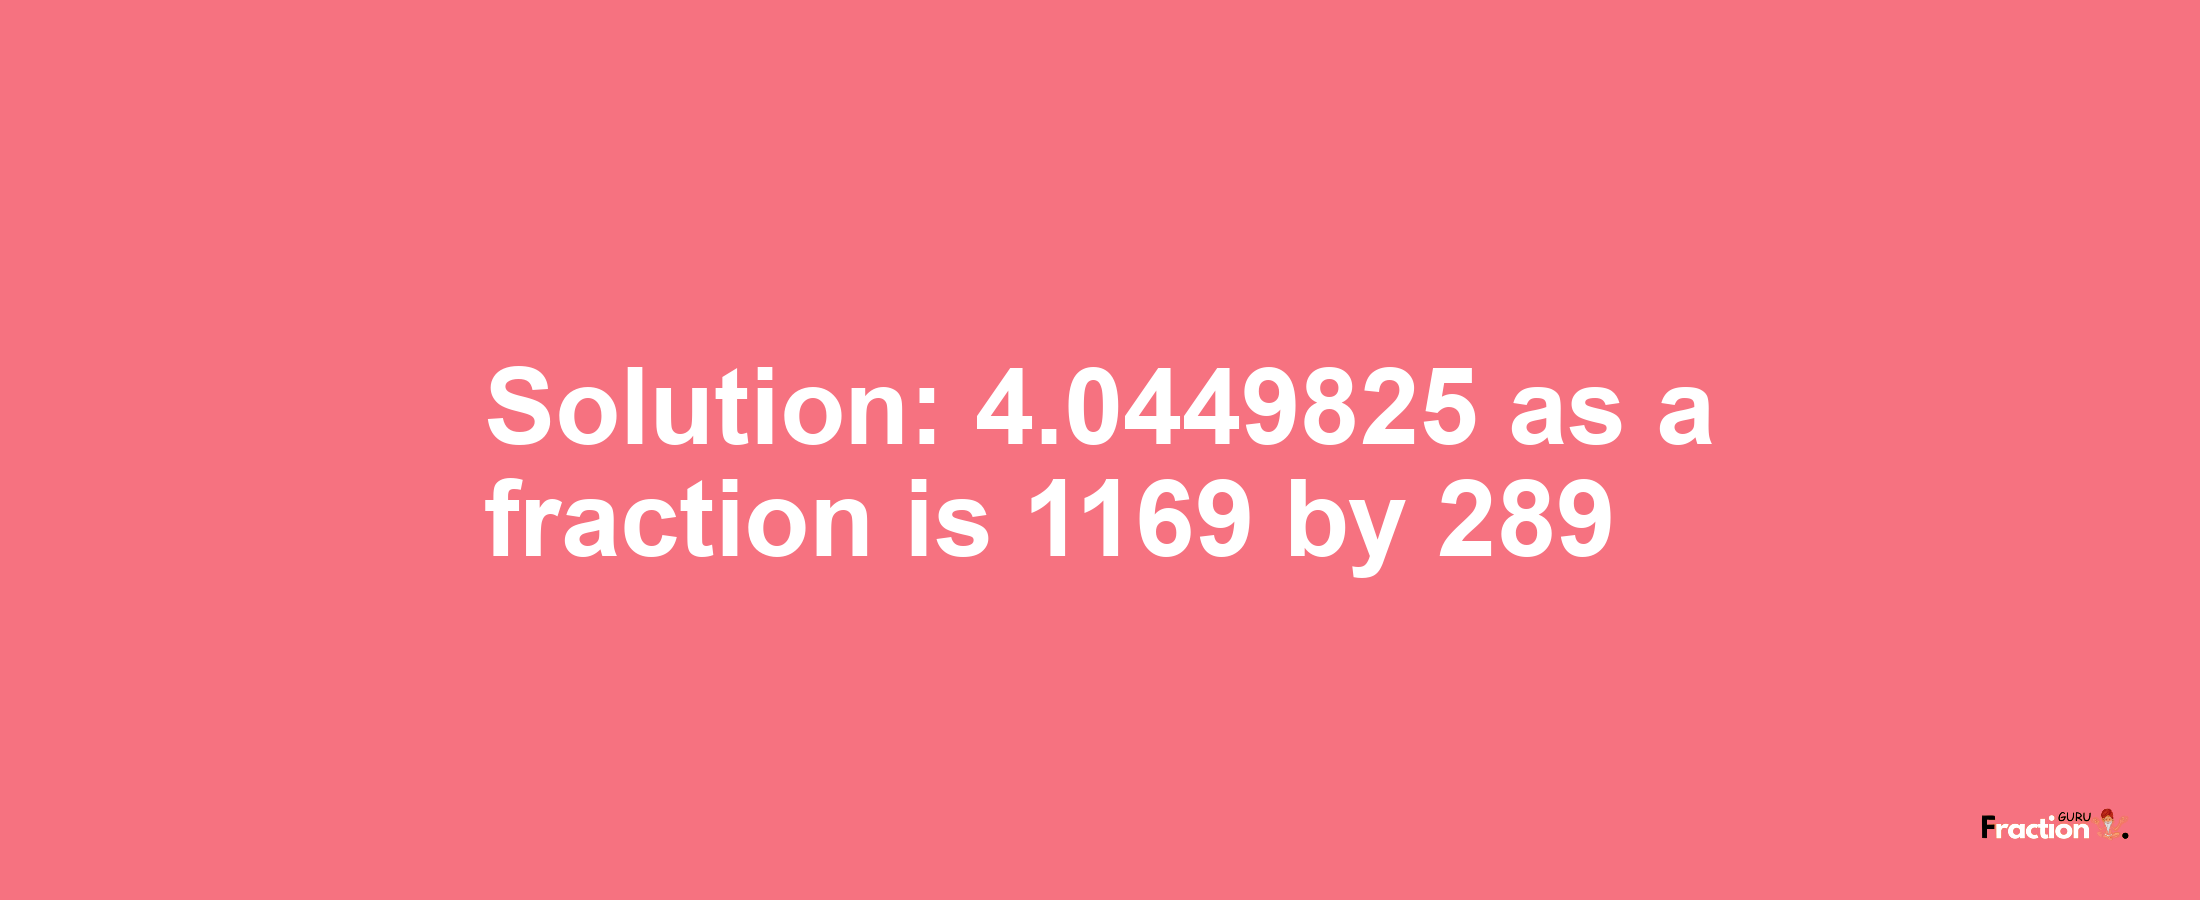 Solution:4.0449825 as a fraction is 1169/289